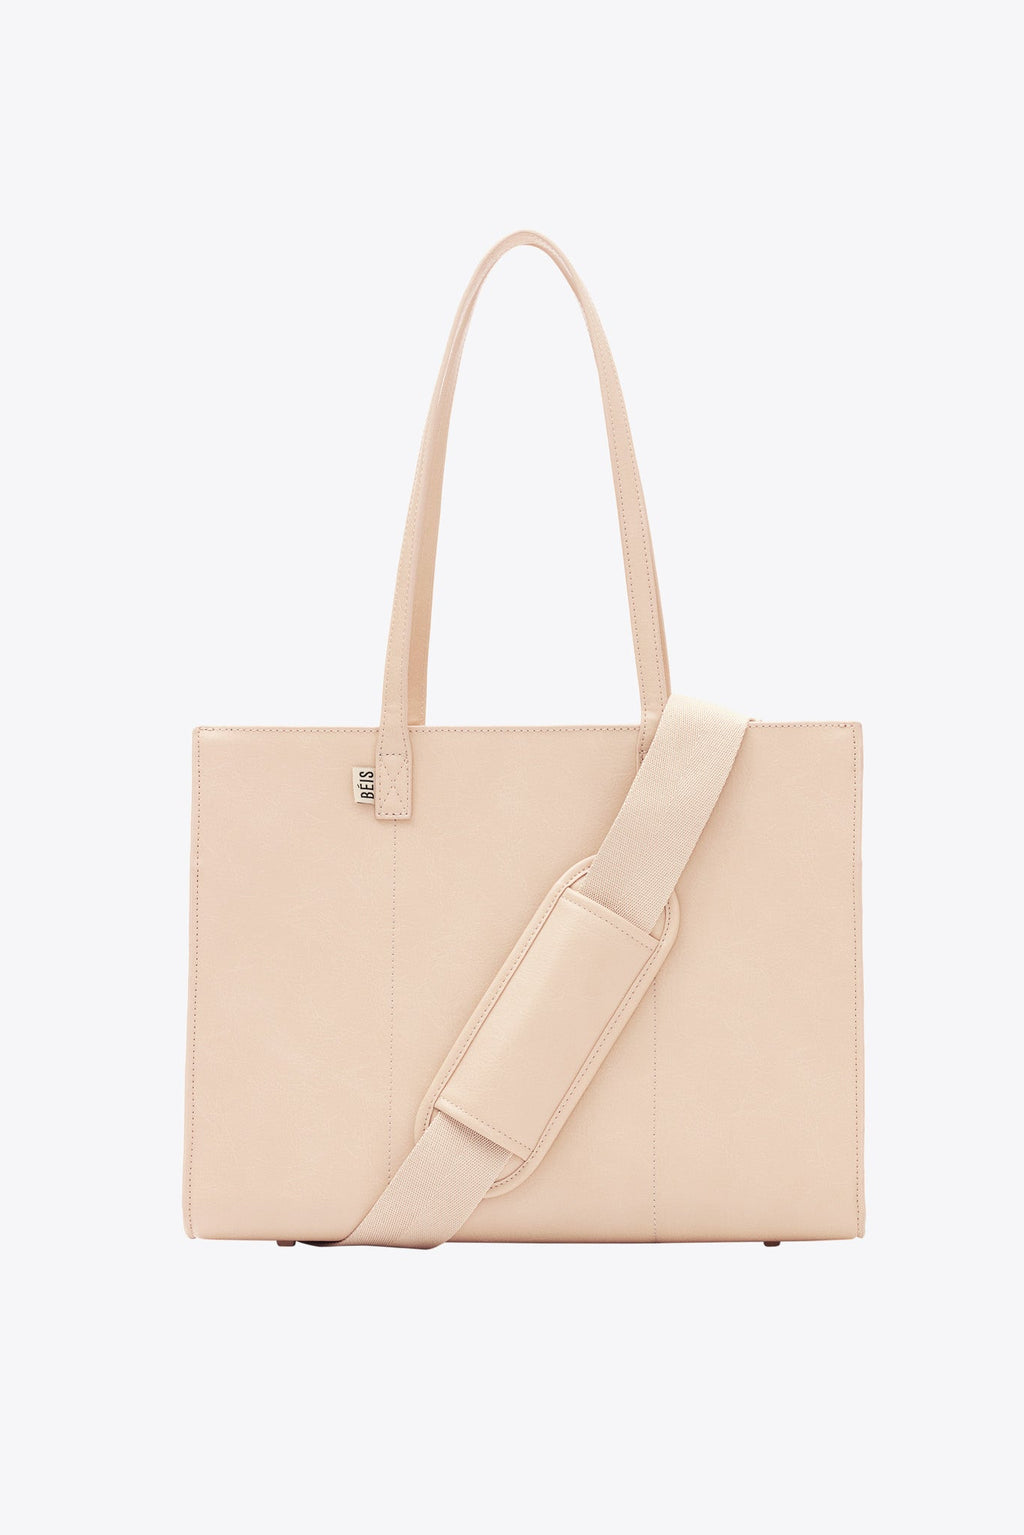 BÉIS 'The Work Tote' in Beige - Small Work Bag For Women